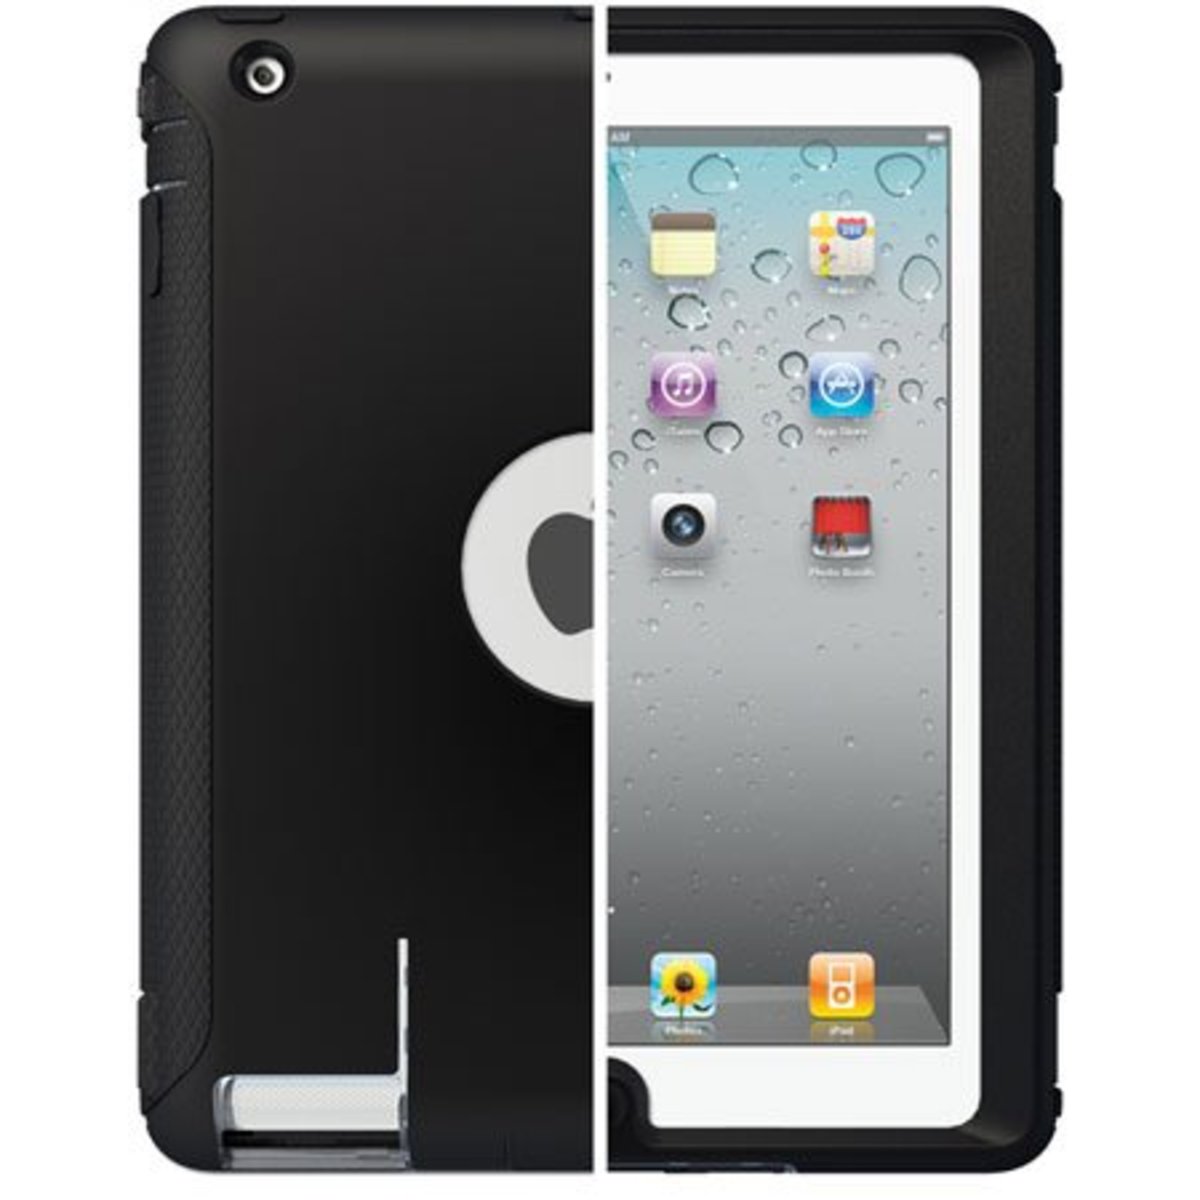 The OtterBox Defender for the iPad can extend the life of your device.